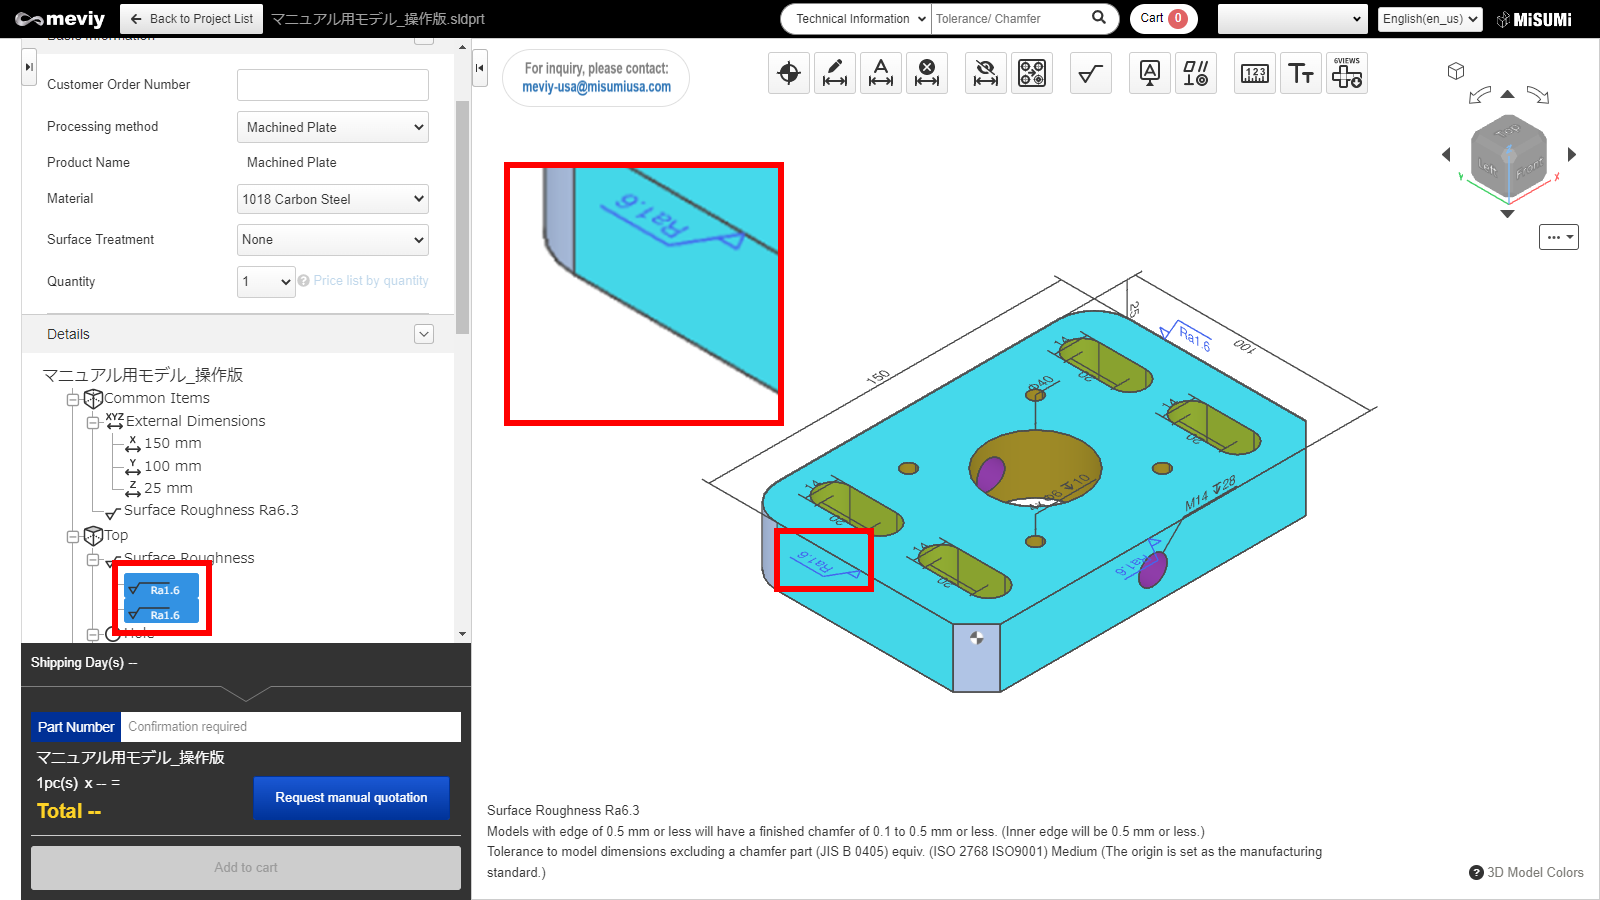 The added surface roughness can be viewed on the 3D model and tree view.